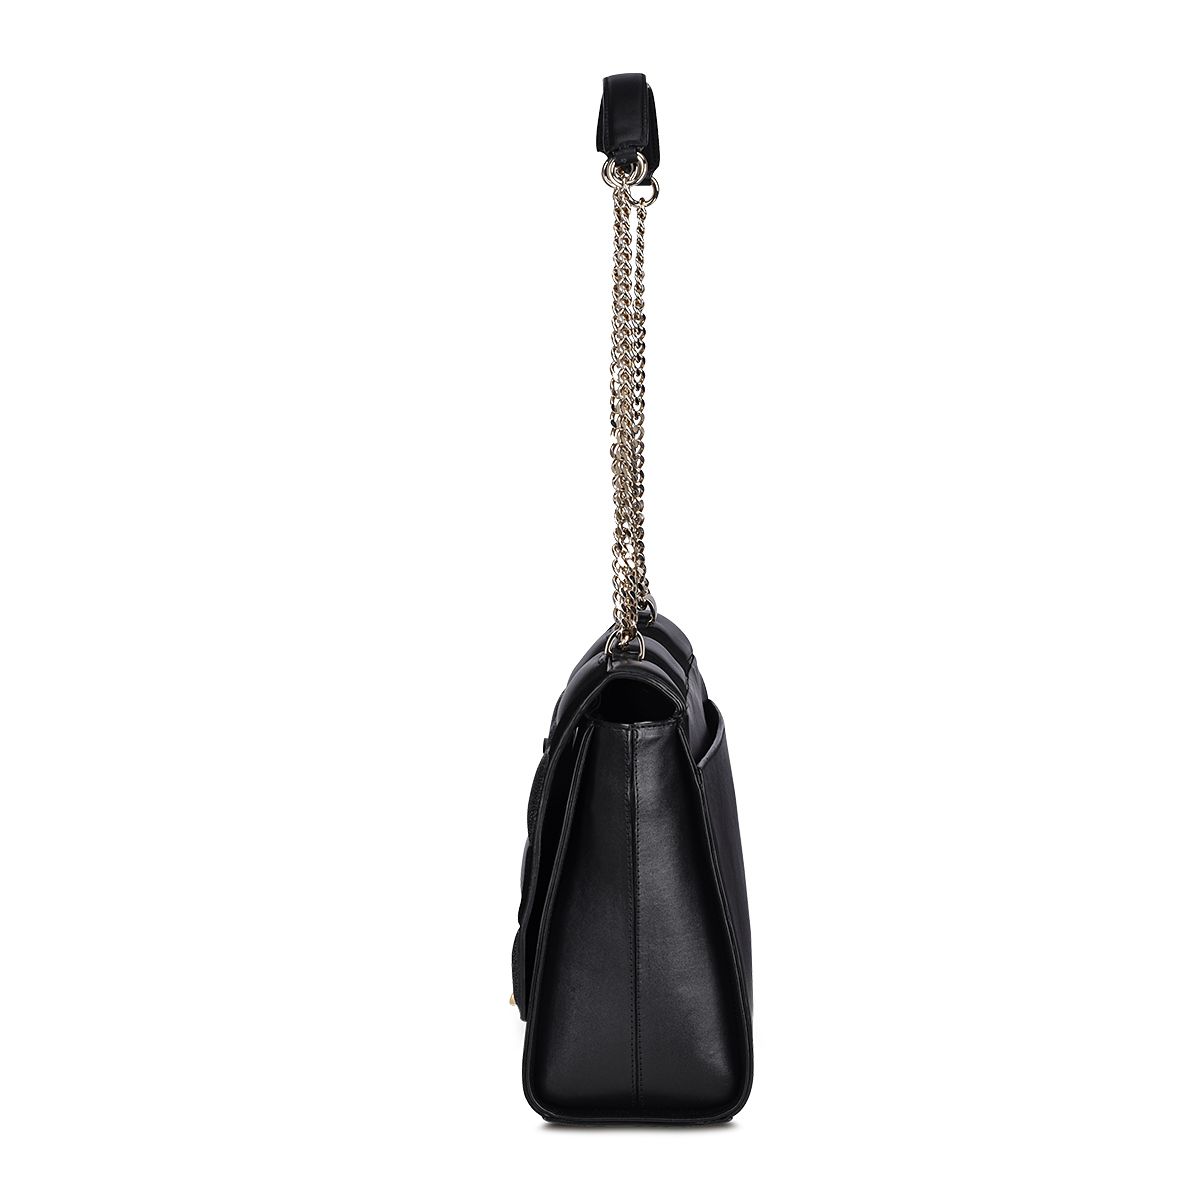 The Chain-Strap Crossbody Bag in Leather